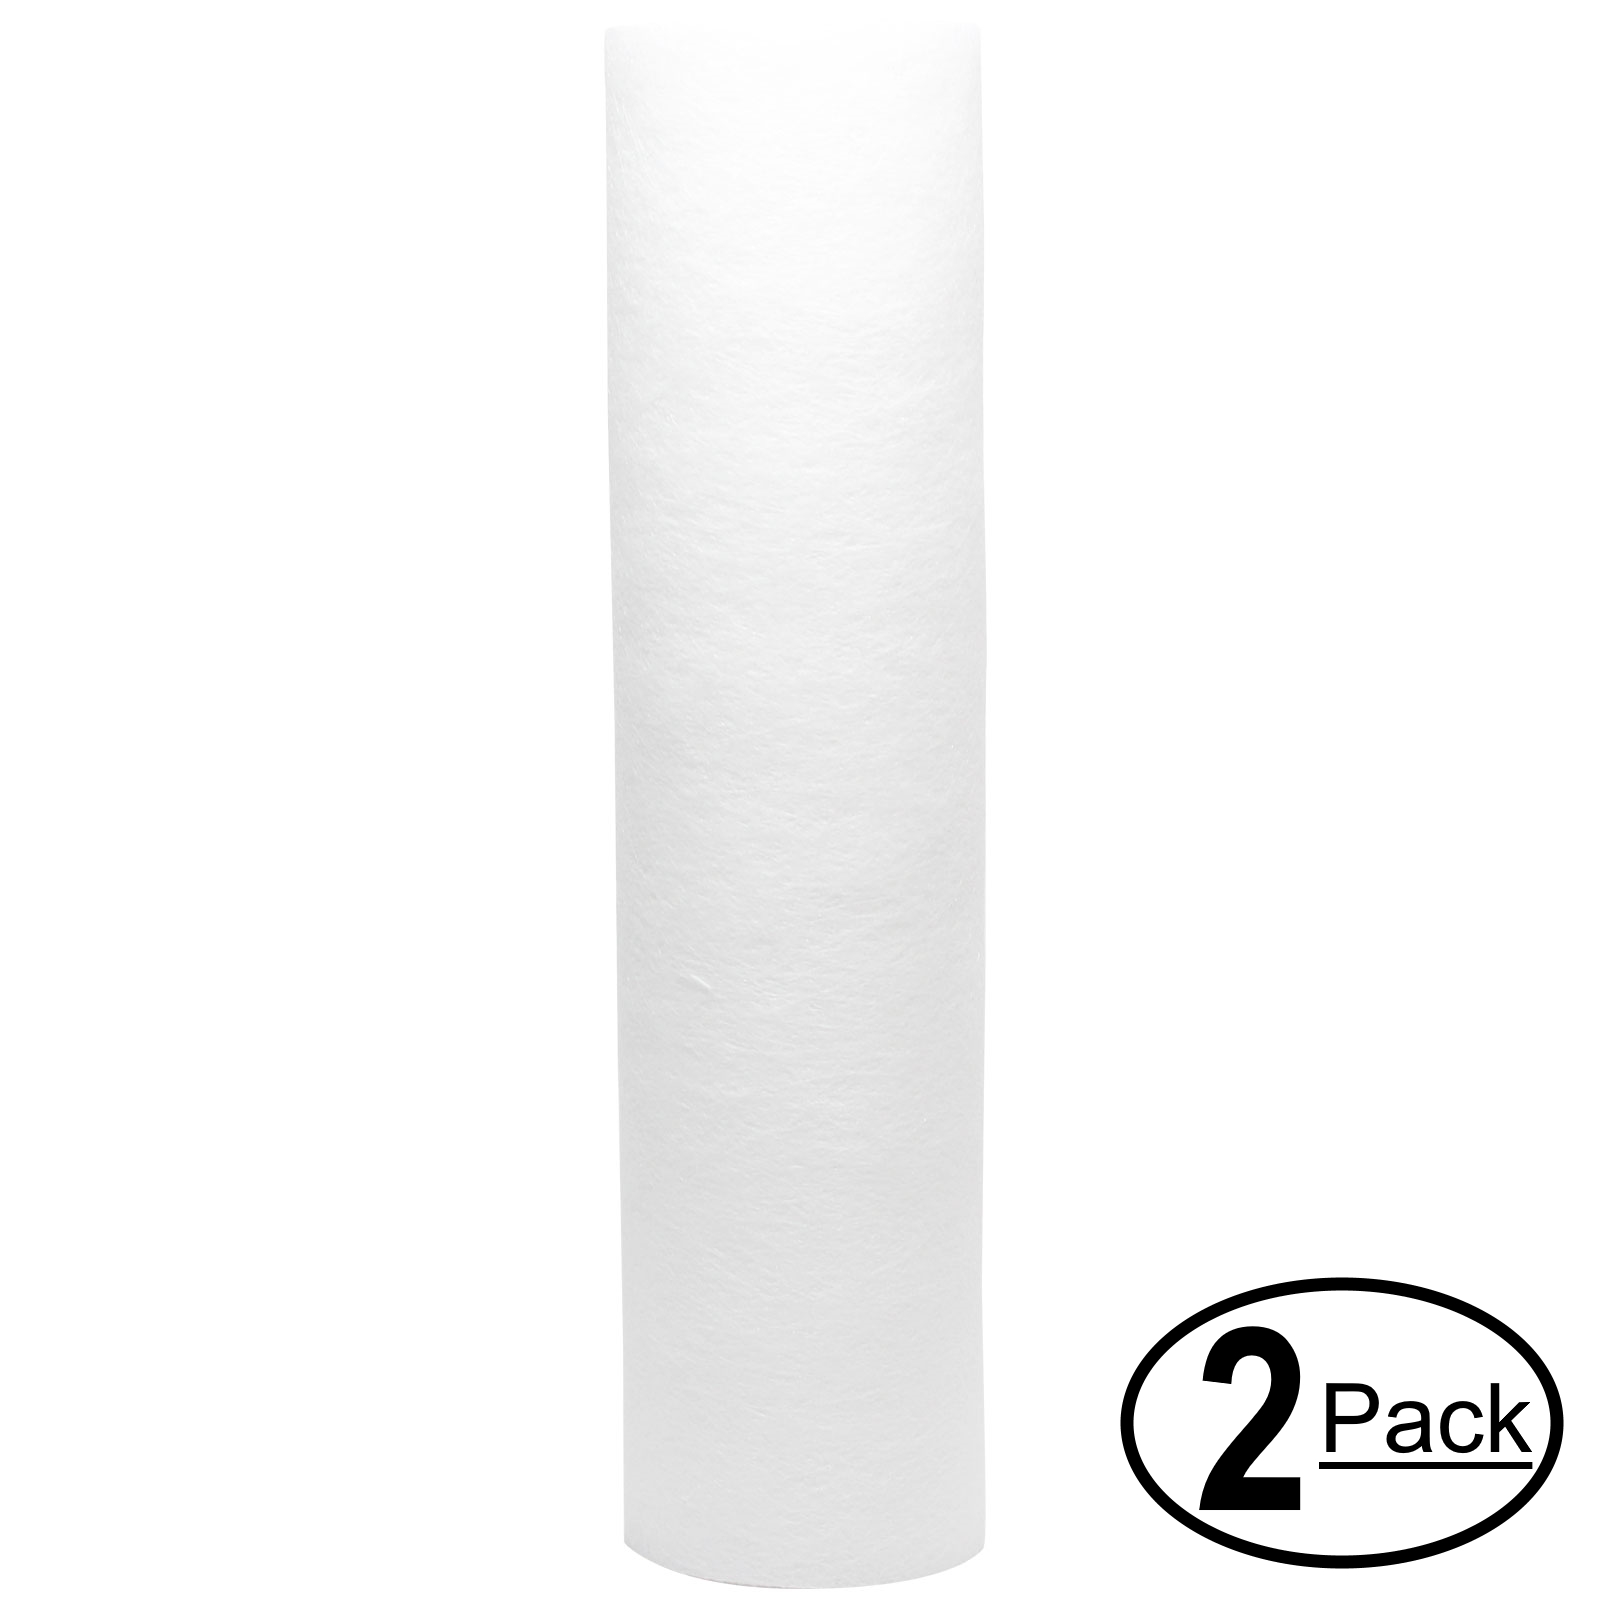 2-Pack Compatible with GE GXWH20F Polypropylene Sediment Filter - Universal 10-inch 5-Micron Cartridge for GE HOUSEHOLD WATER FILTRATION SYSTEM - Denali Pure Brand - image 1 of 4